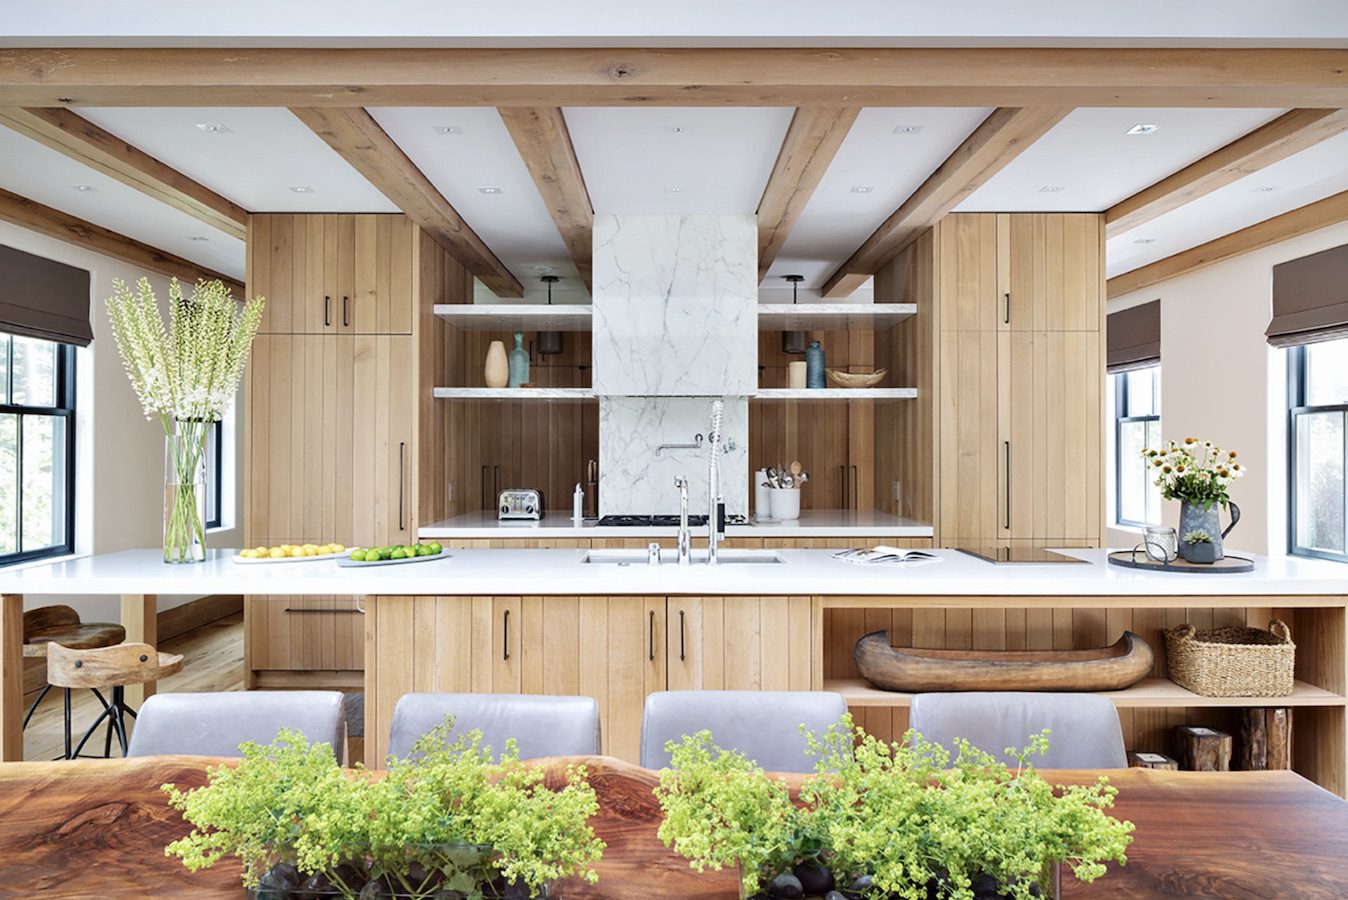 A modern kitchen with wooden cabinets and a wooden table.